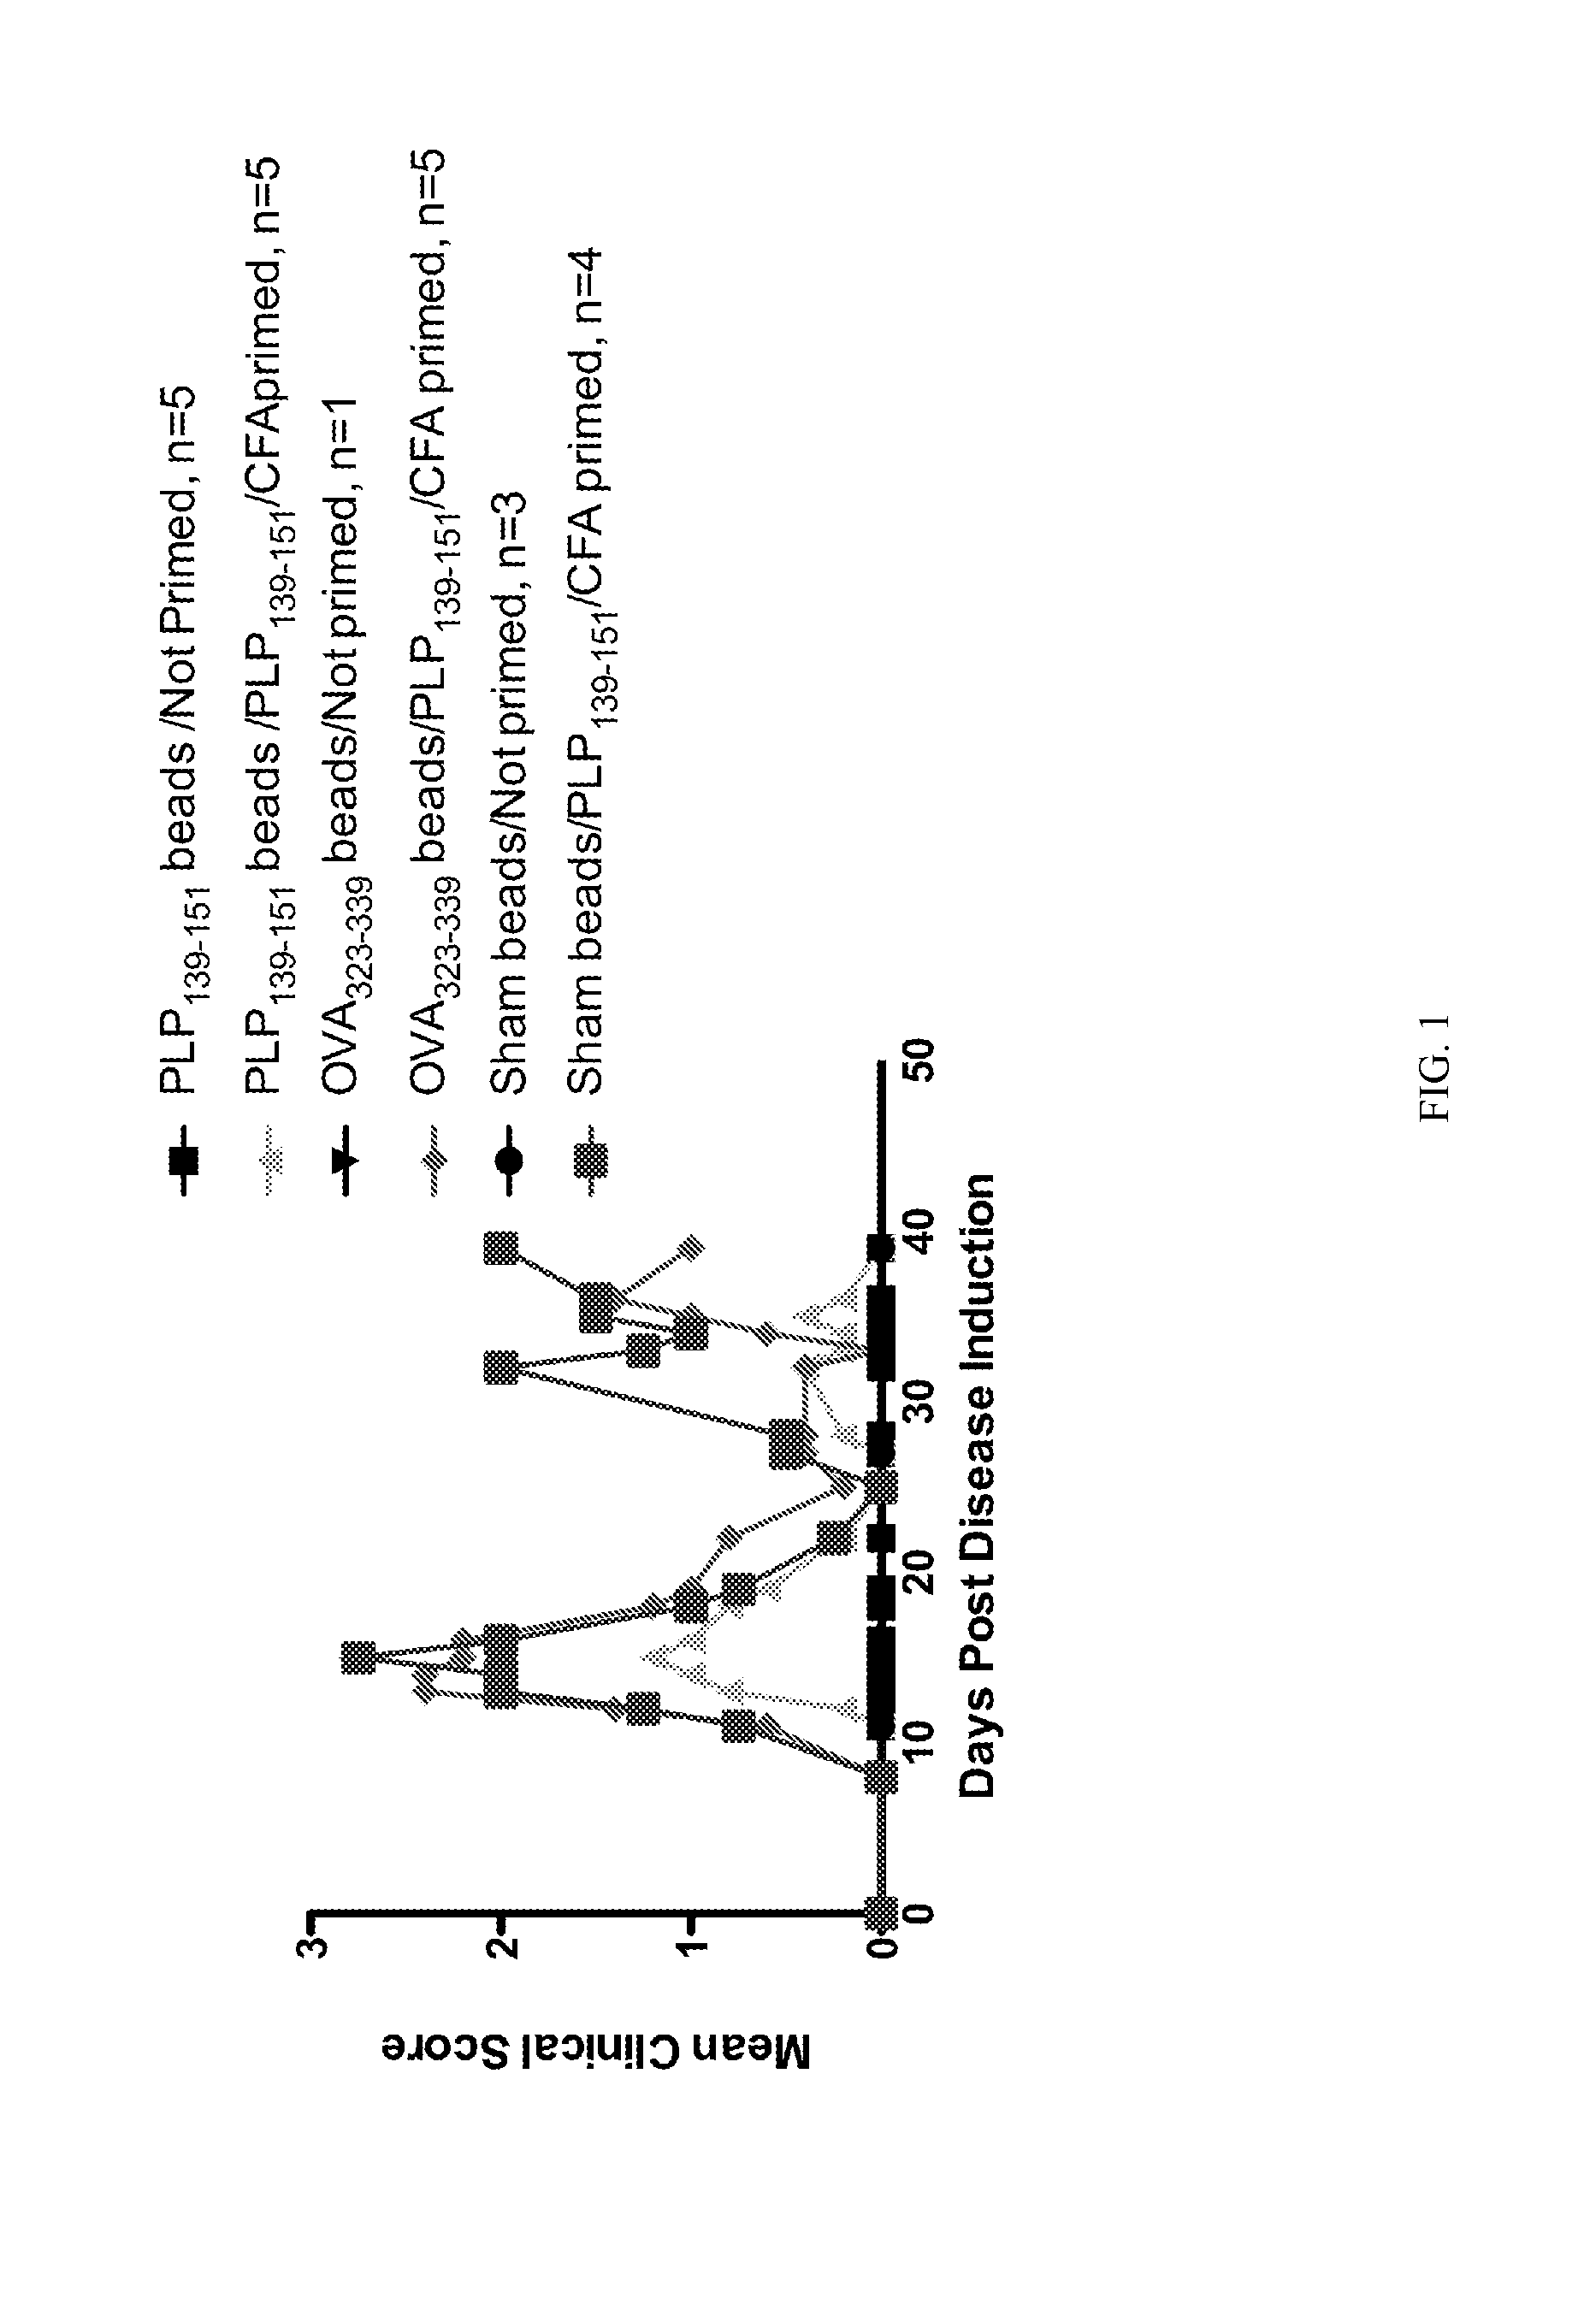 Compositions and methods for induction of antigen-specific tolerance